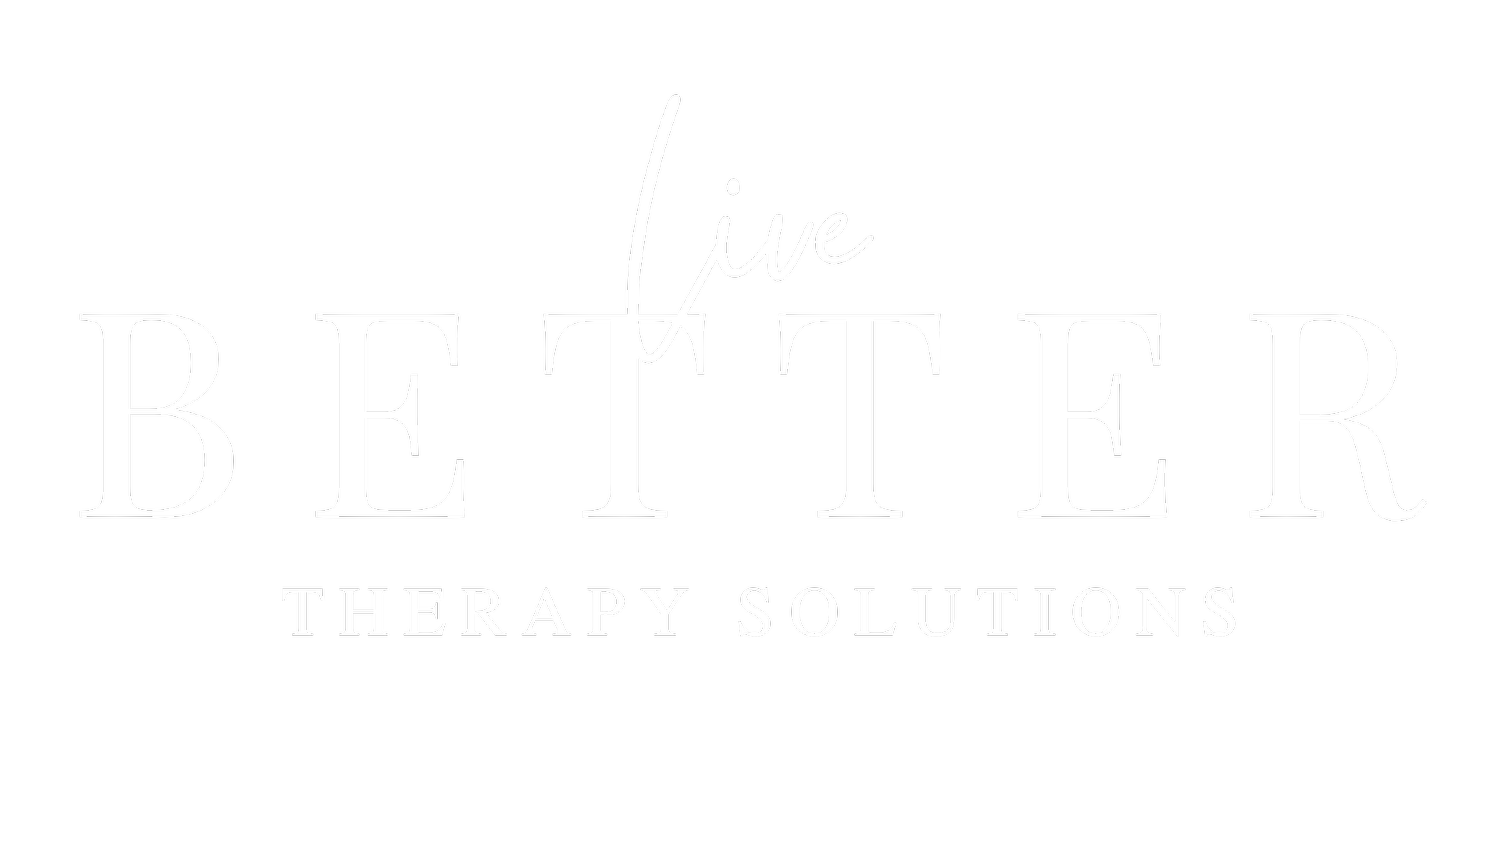 Live Better Therapy Solutions